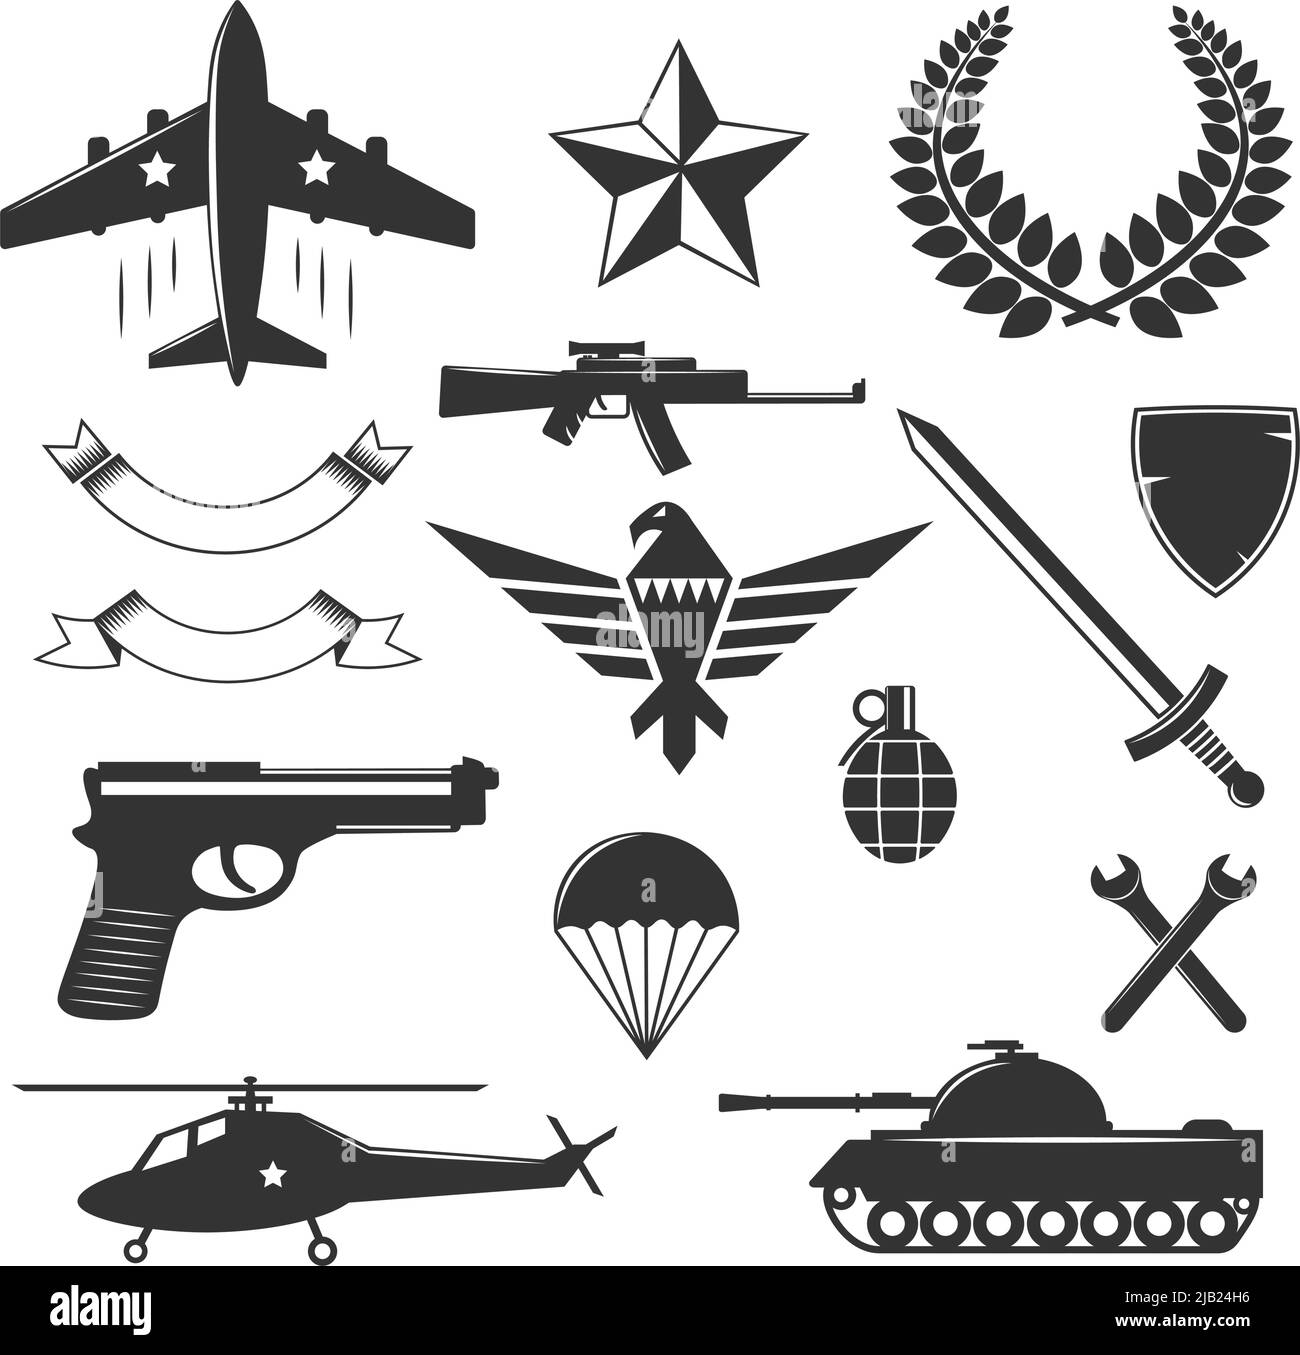 Military emblems elements set of isolated monochrome images of weapons signs and symbols on blank background vector illustration Stock Vector